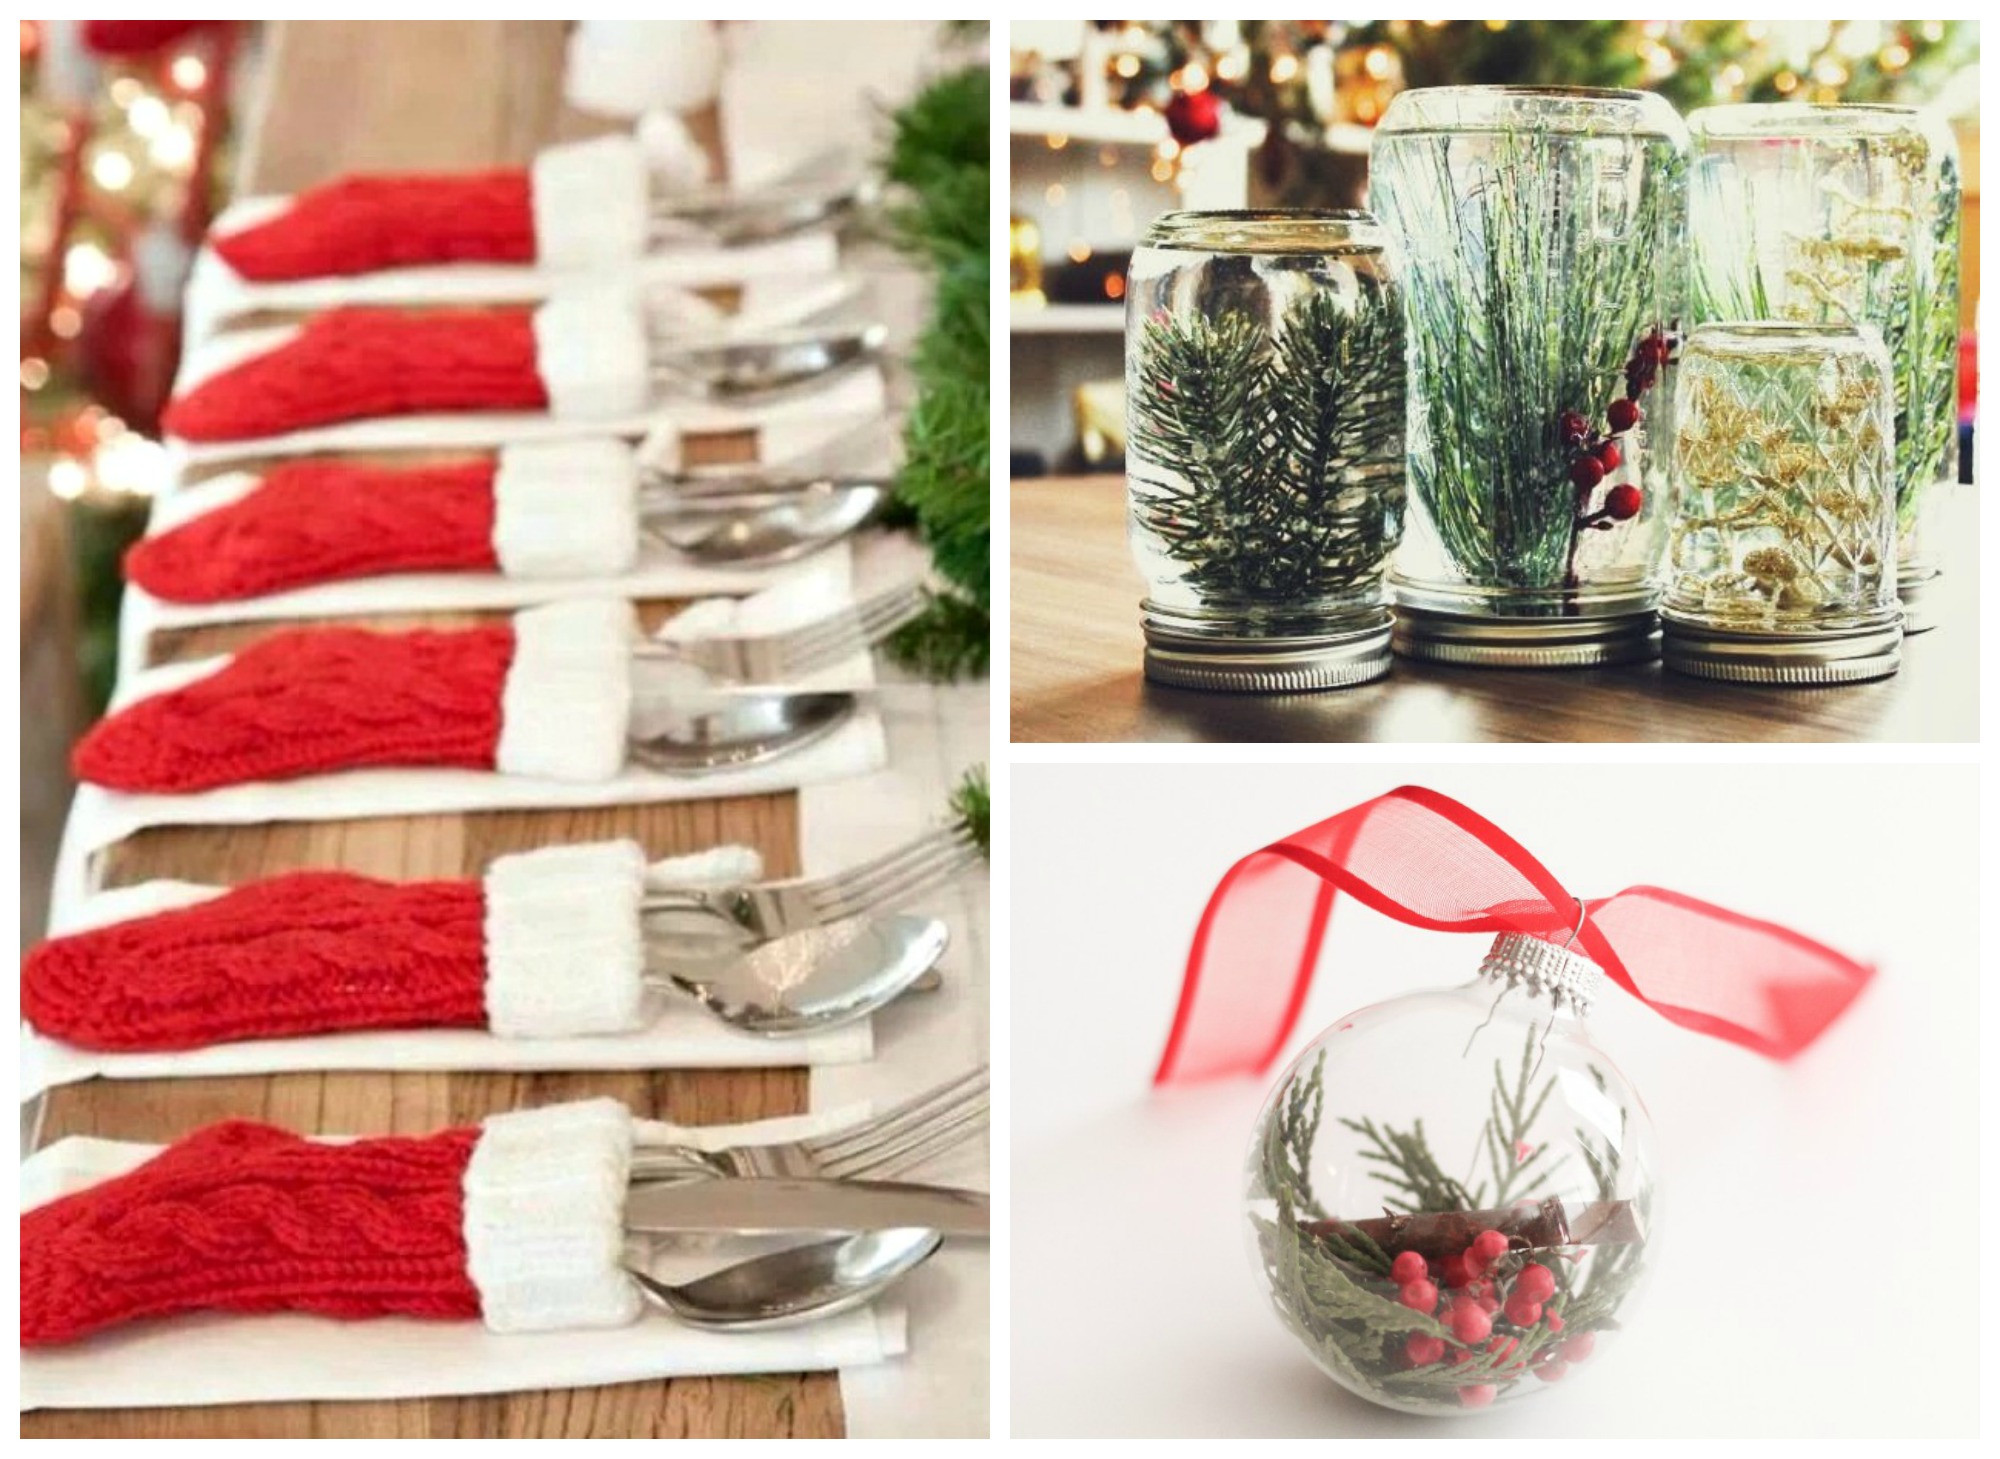 DIY Christmas Decorations
 10 Dollar Store DIY Christmas Decorations that are Beyond Easy